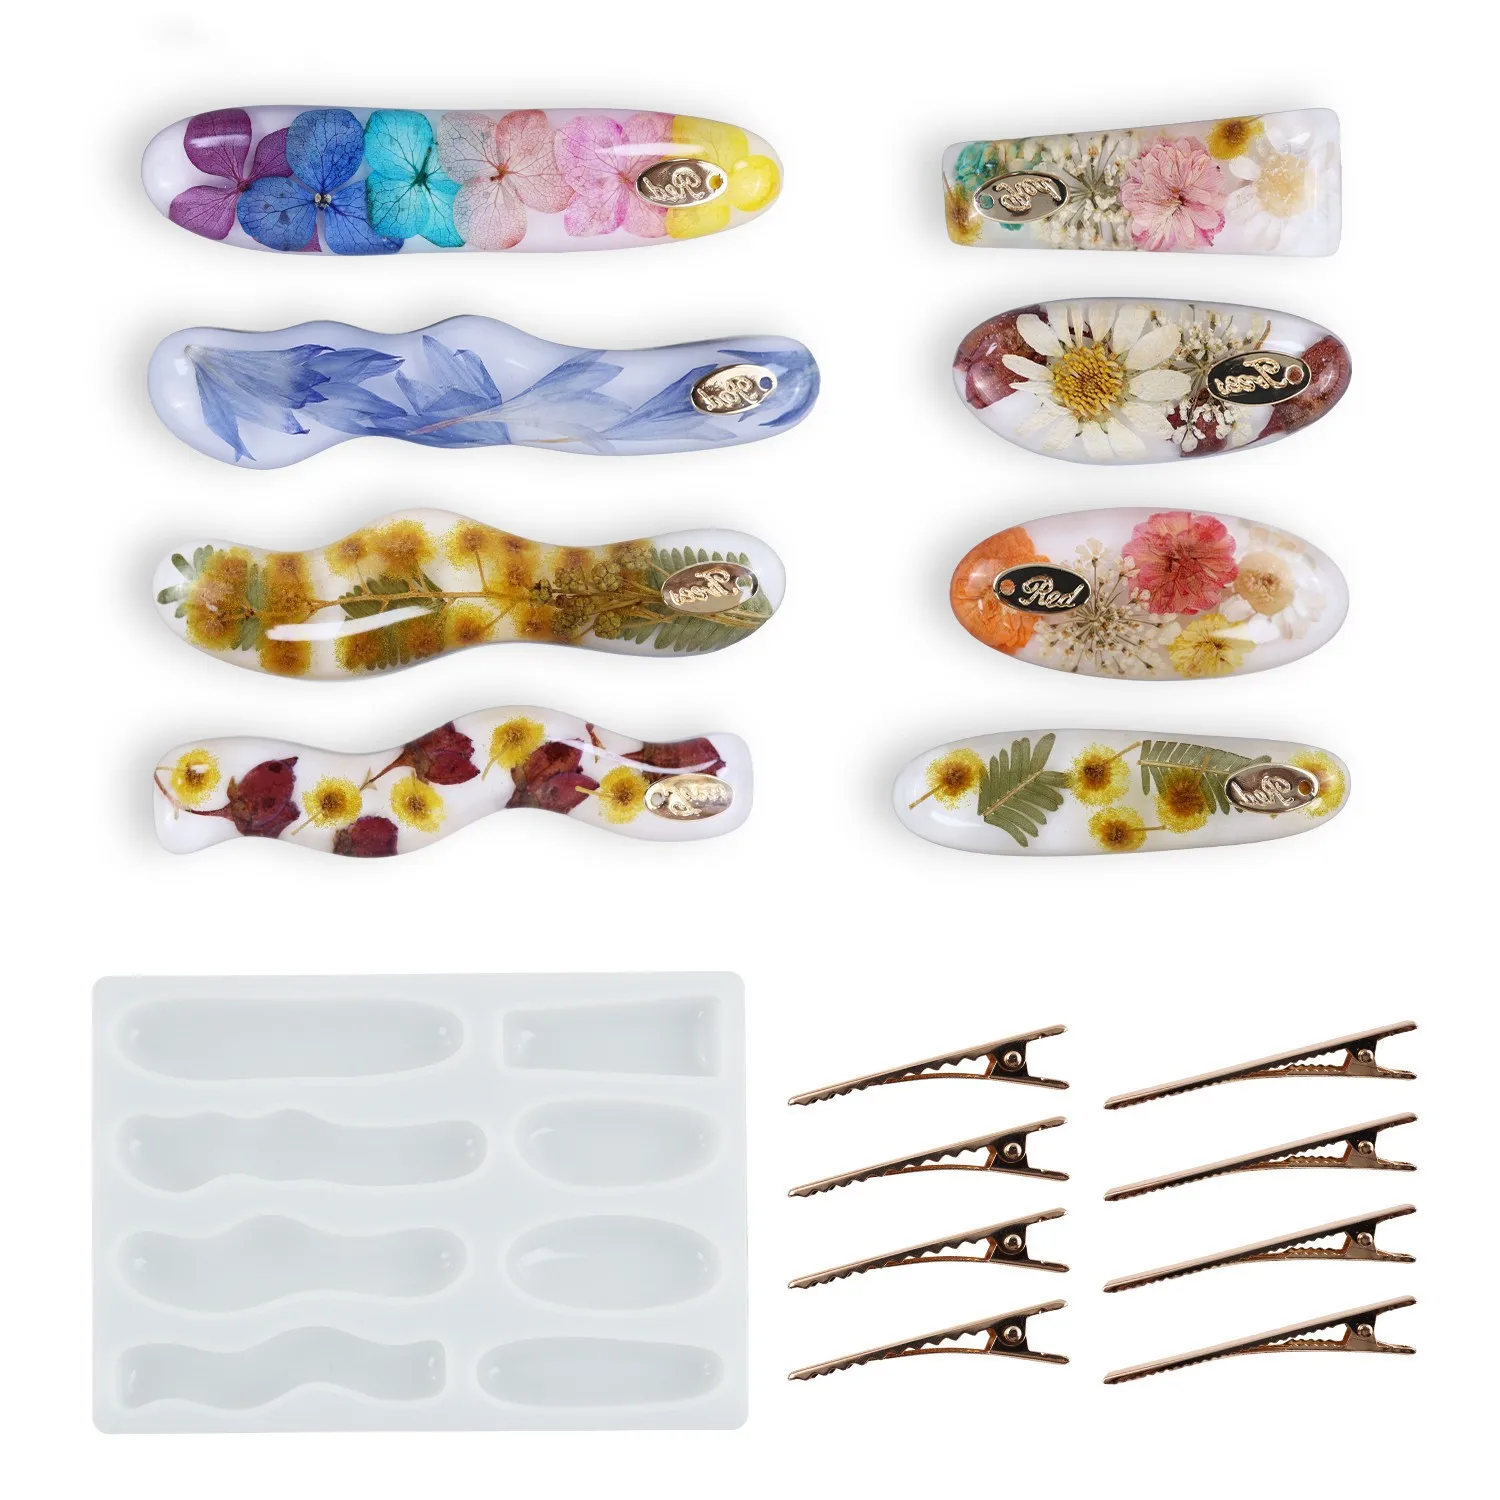 DIY Pendant UV Epoxy Resin Mold Irregular Hairpin Mirror Jewelry Silicone Mold Hair clip Accessaries Mould For Resin Making 4pcs irregular geode silicone mold tray mold diy fruit tray epoxy resin mold coaster mold jewelry crafts